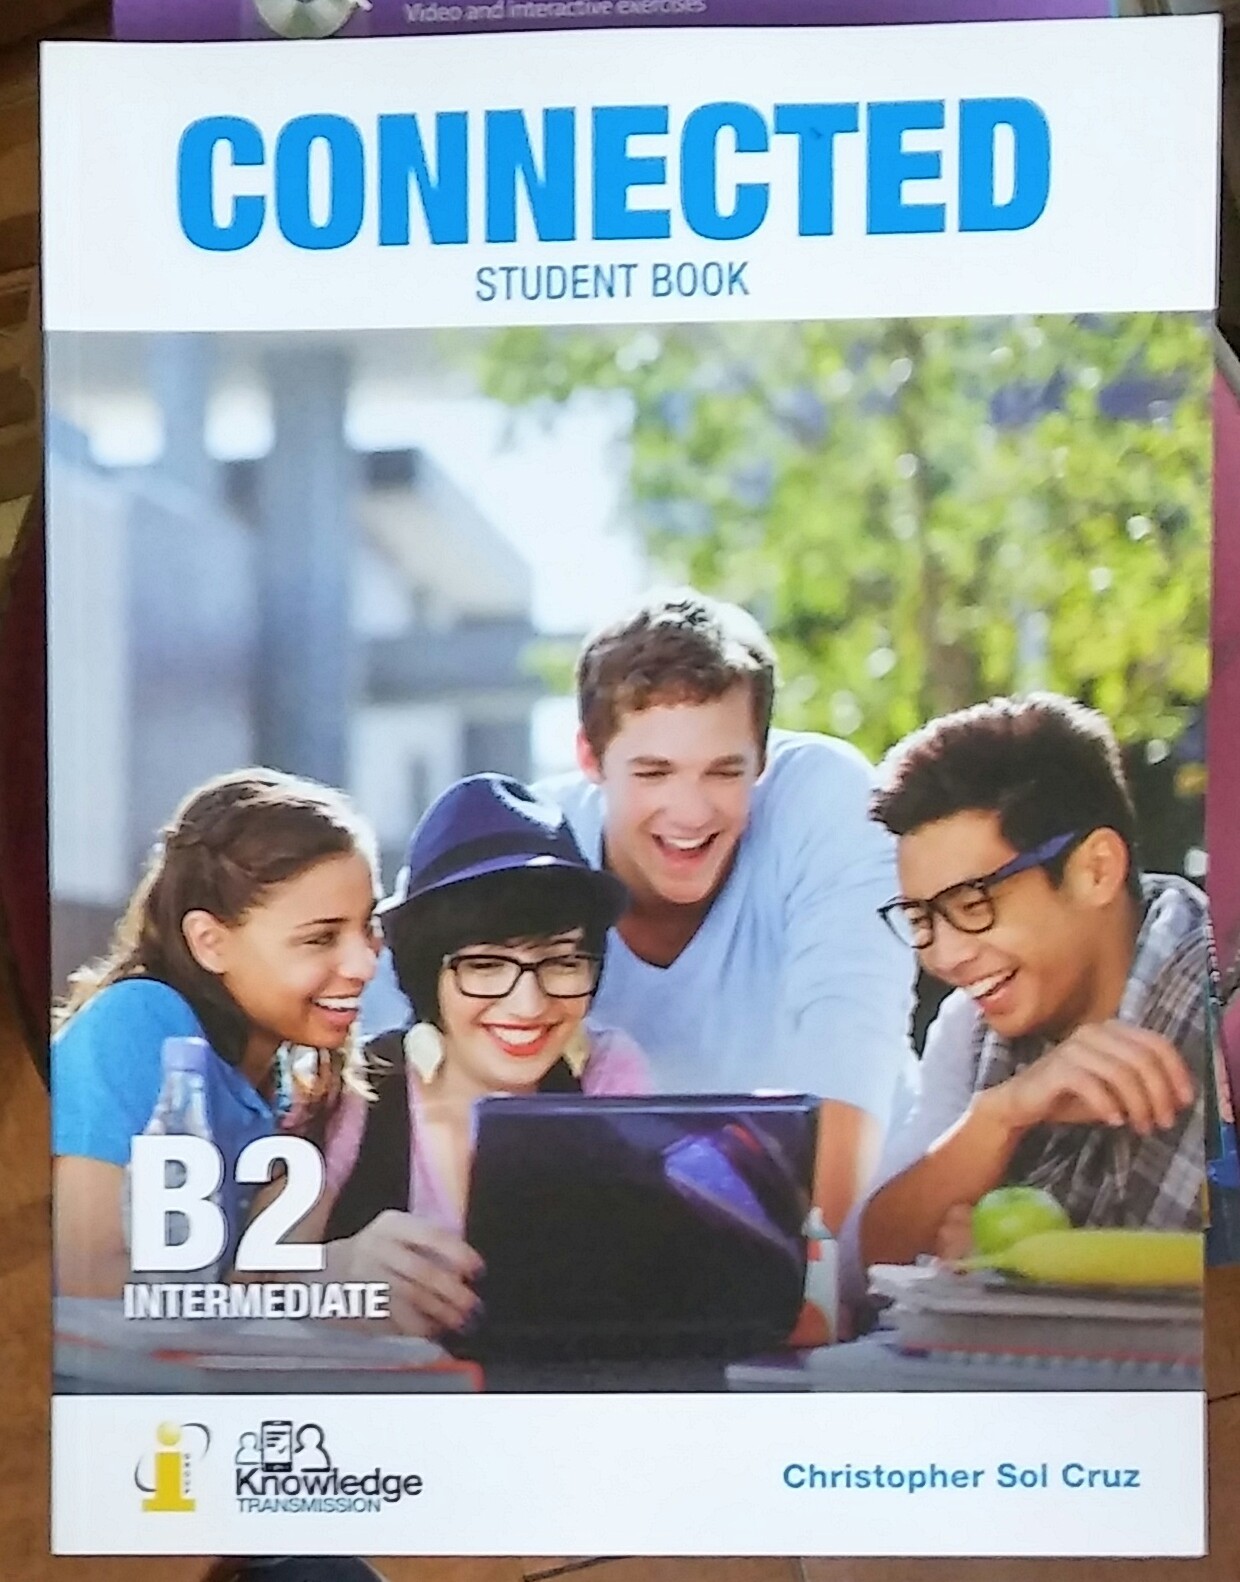 CONNECTED STUDENT BOOK-B2 INTERMEDIATE